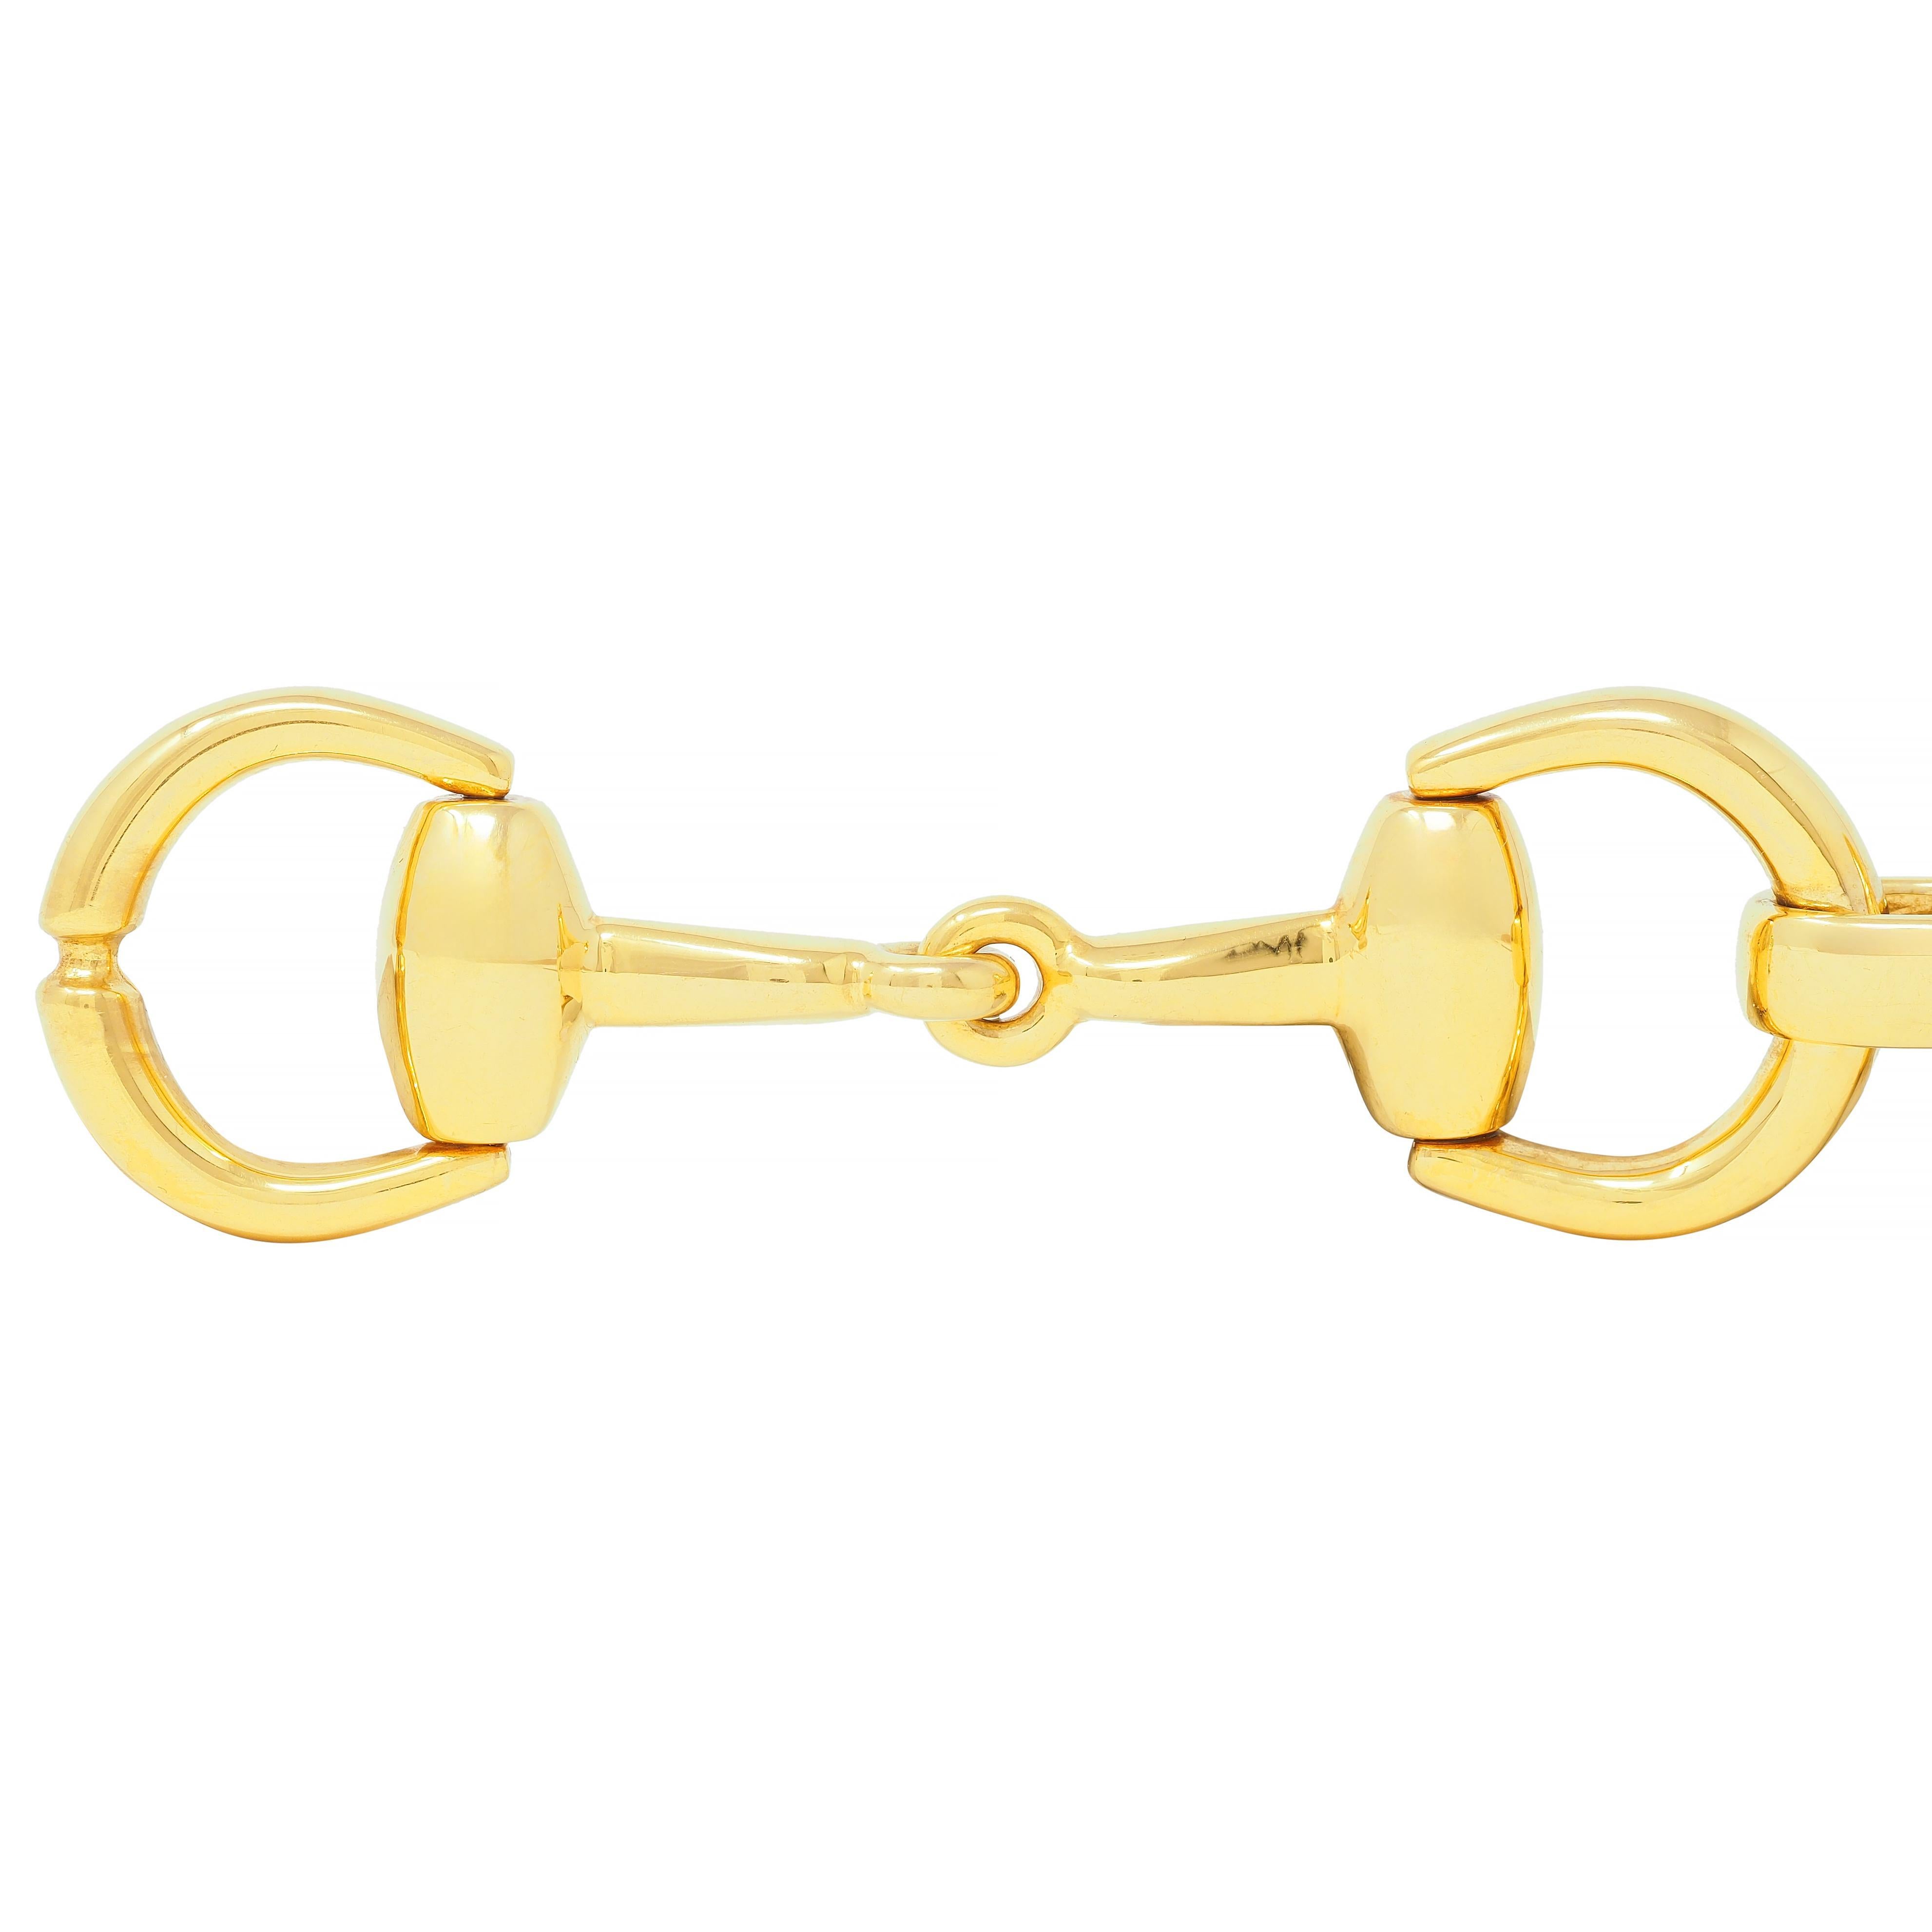 Bracelet is designed as large horsebit motif links
Connected via large oval shaped links
With high polished gold finish
Terminating horse-bit is hinged as clasp closure
Stamped 750 with Italian assay marks for 18 karat gold
Fully signed Gucci, Made